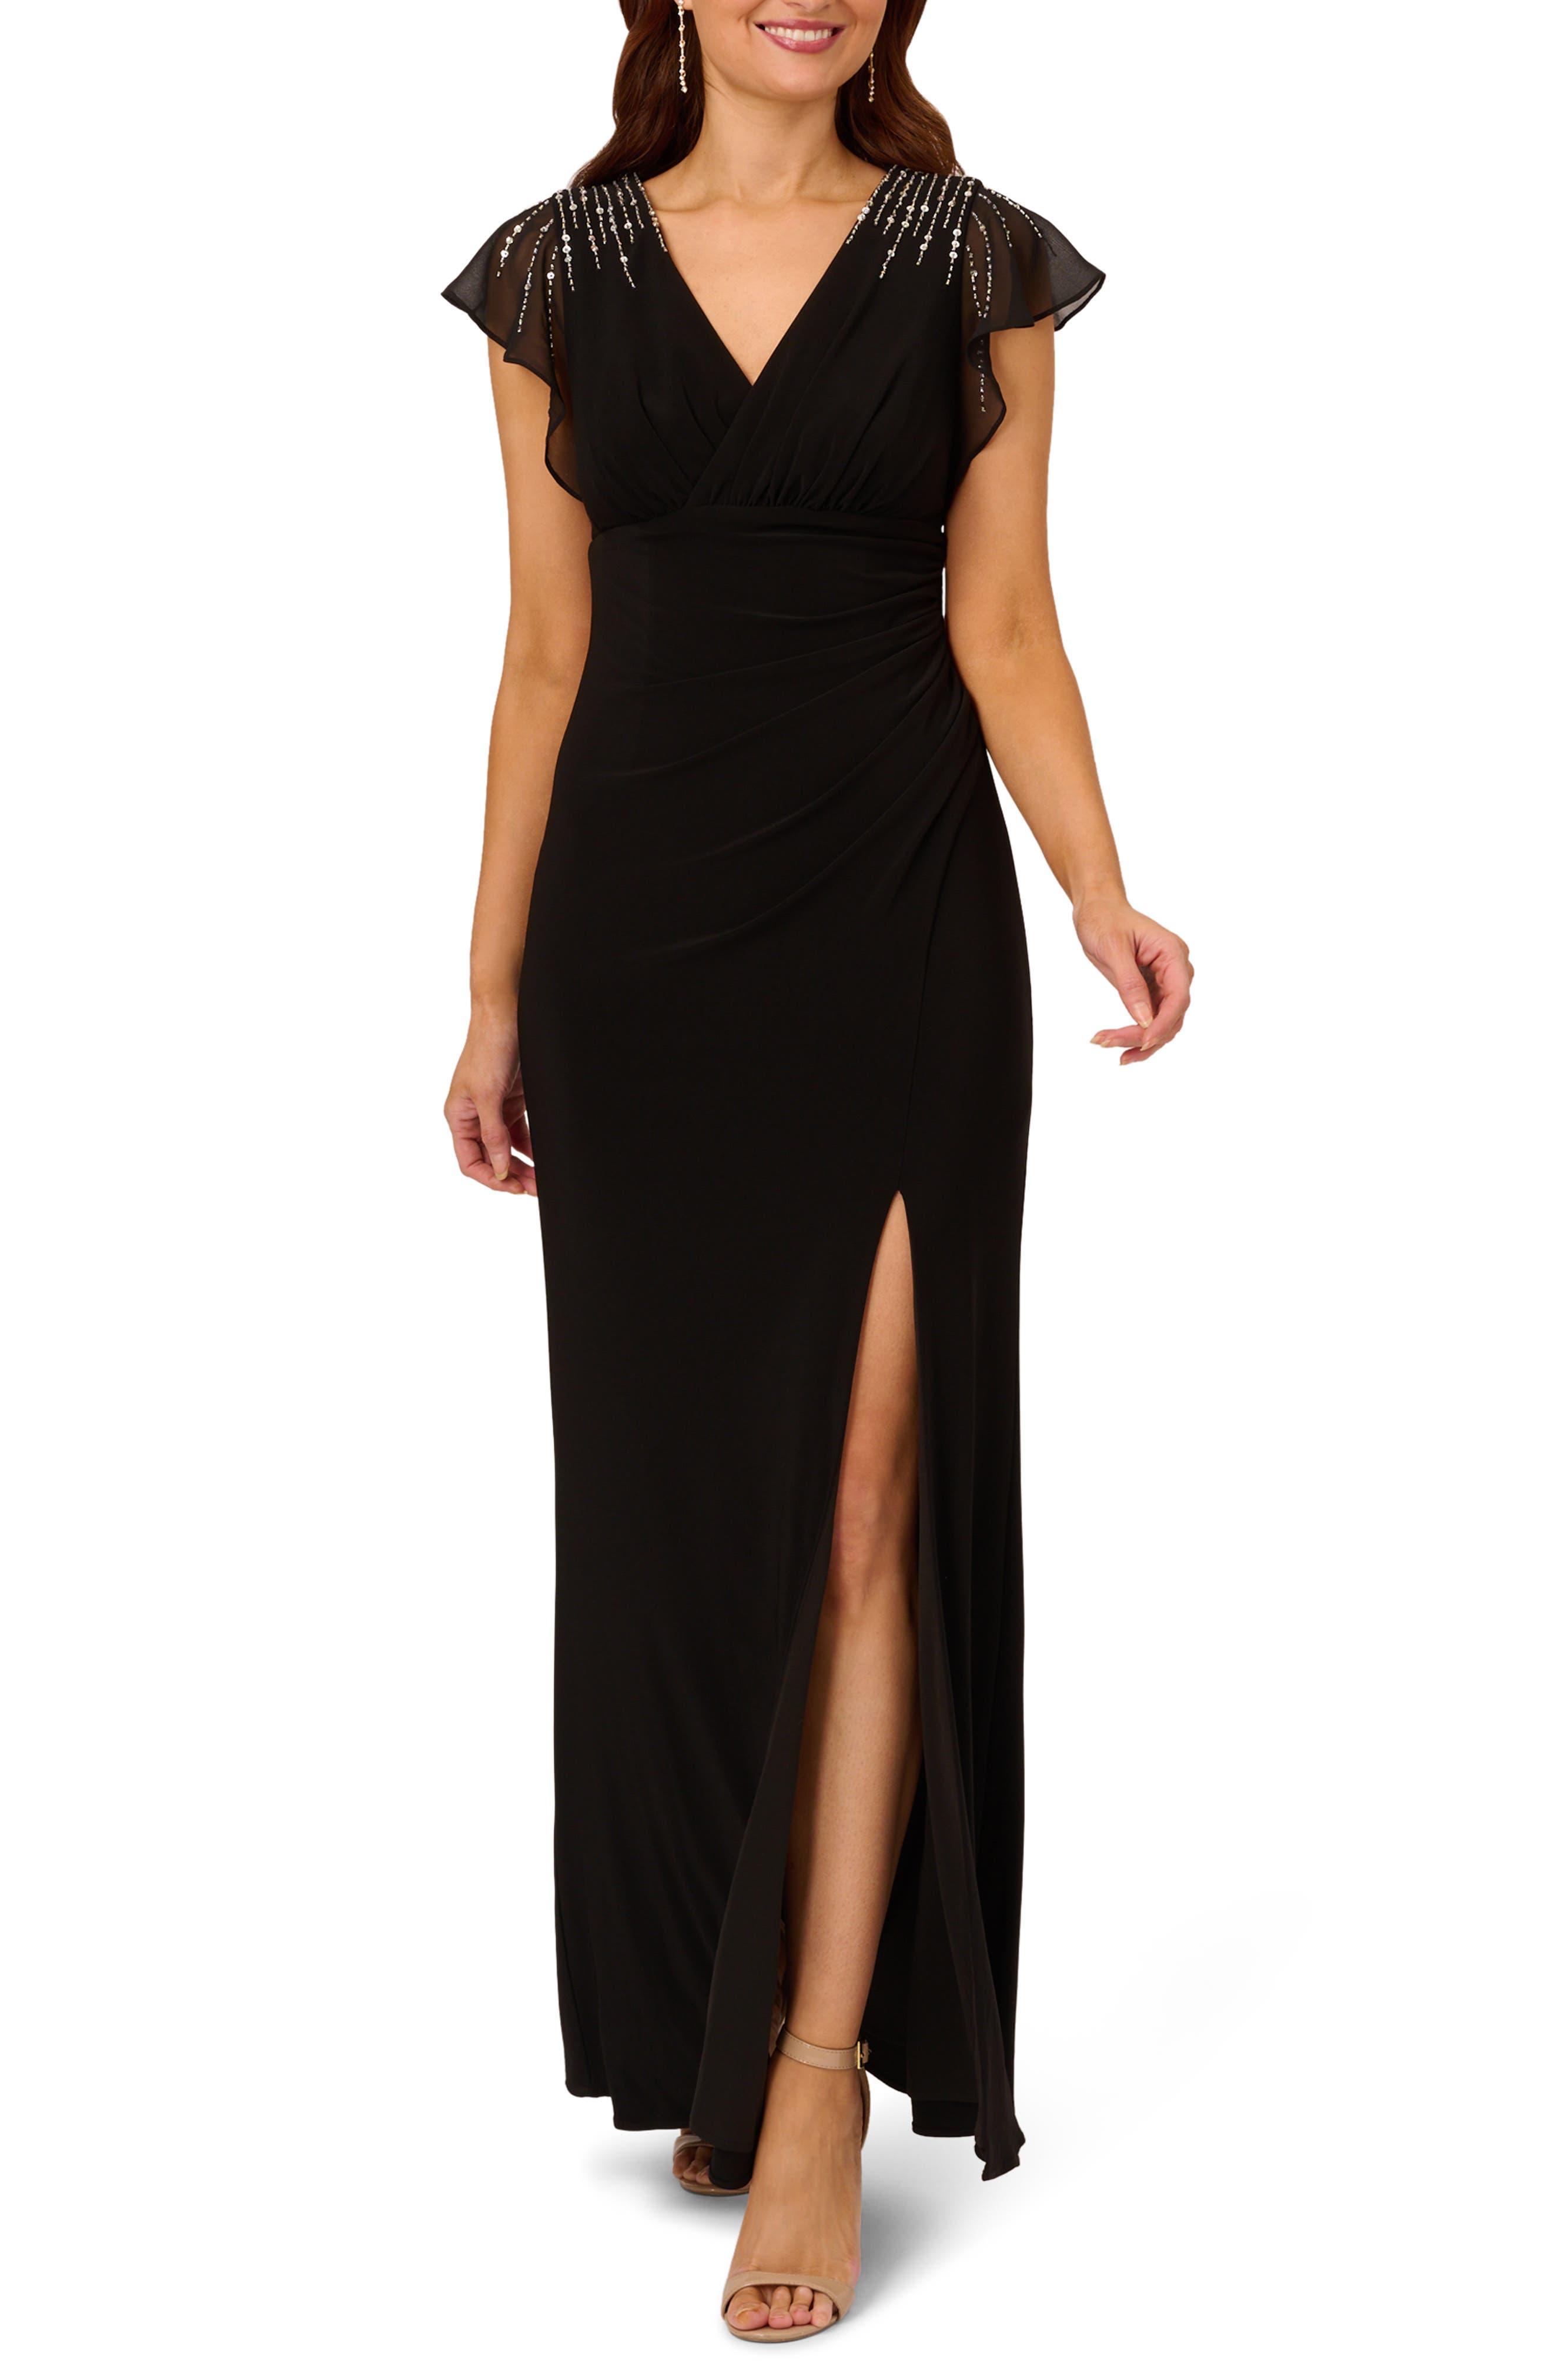 Adrianna Papell Beaded Jersey & Chiffon Faux Wrap Gown in Black | Lyst